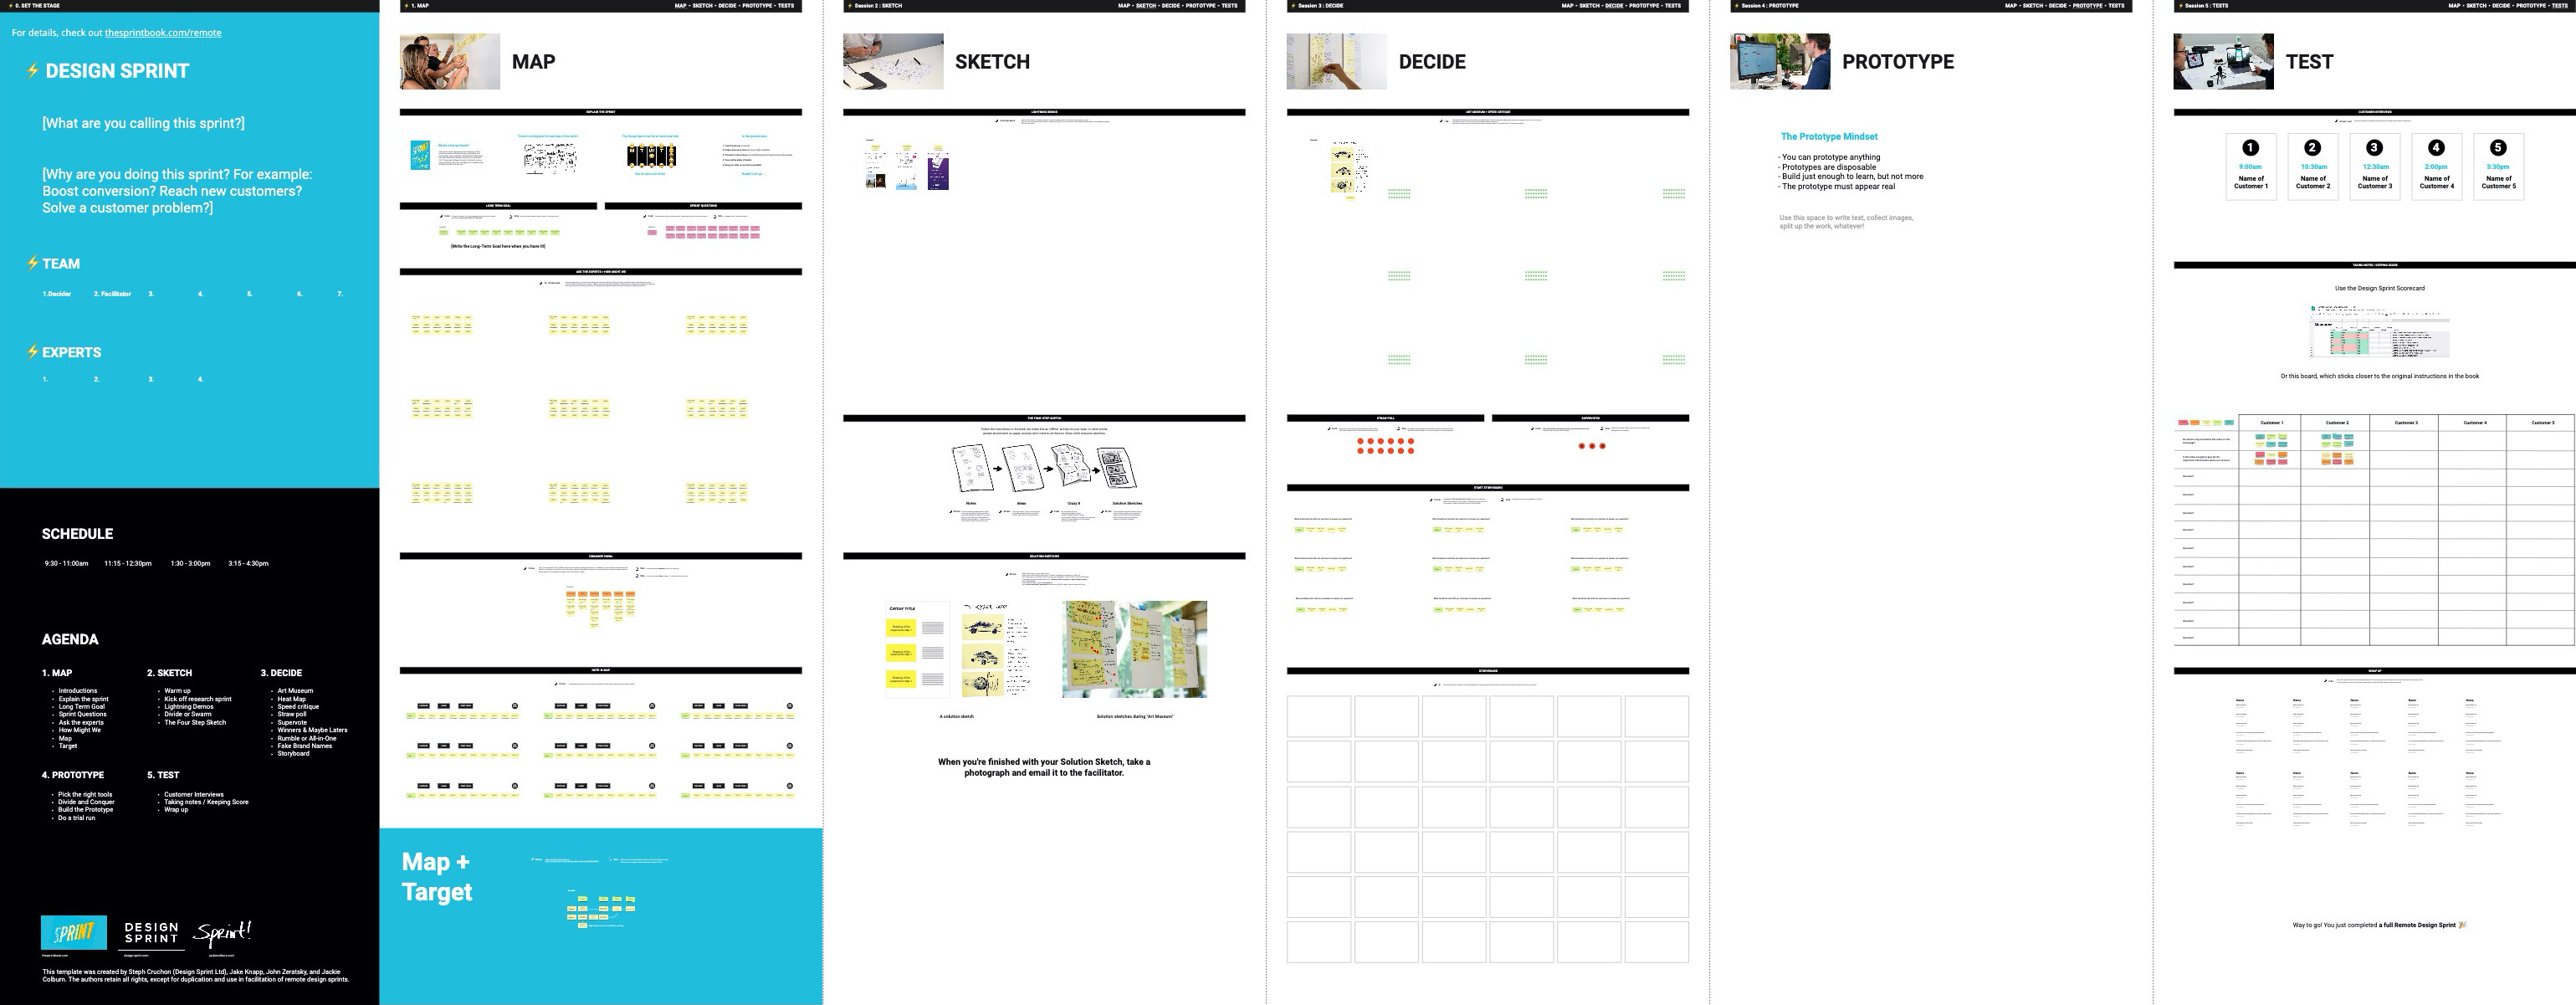 The official Design Sprint template